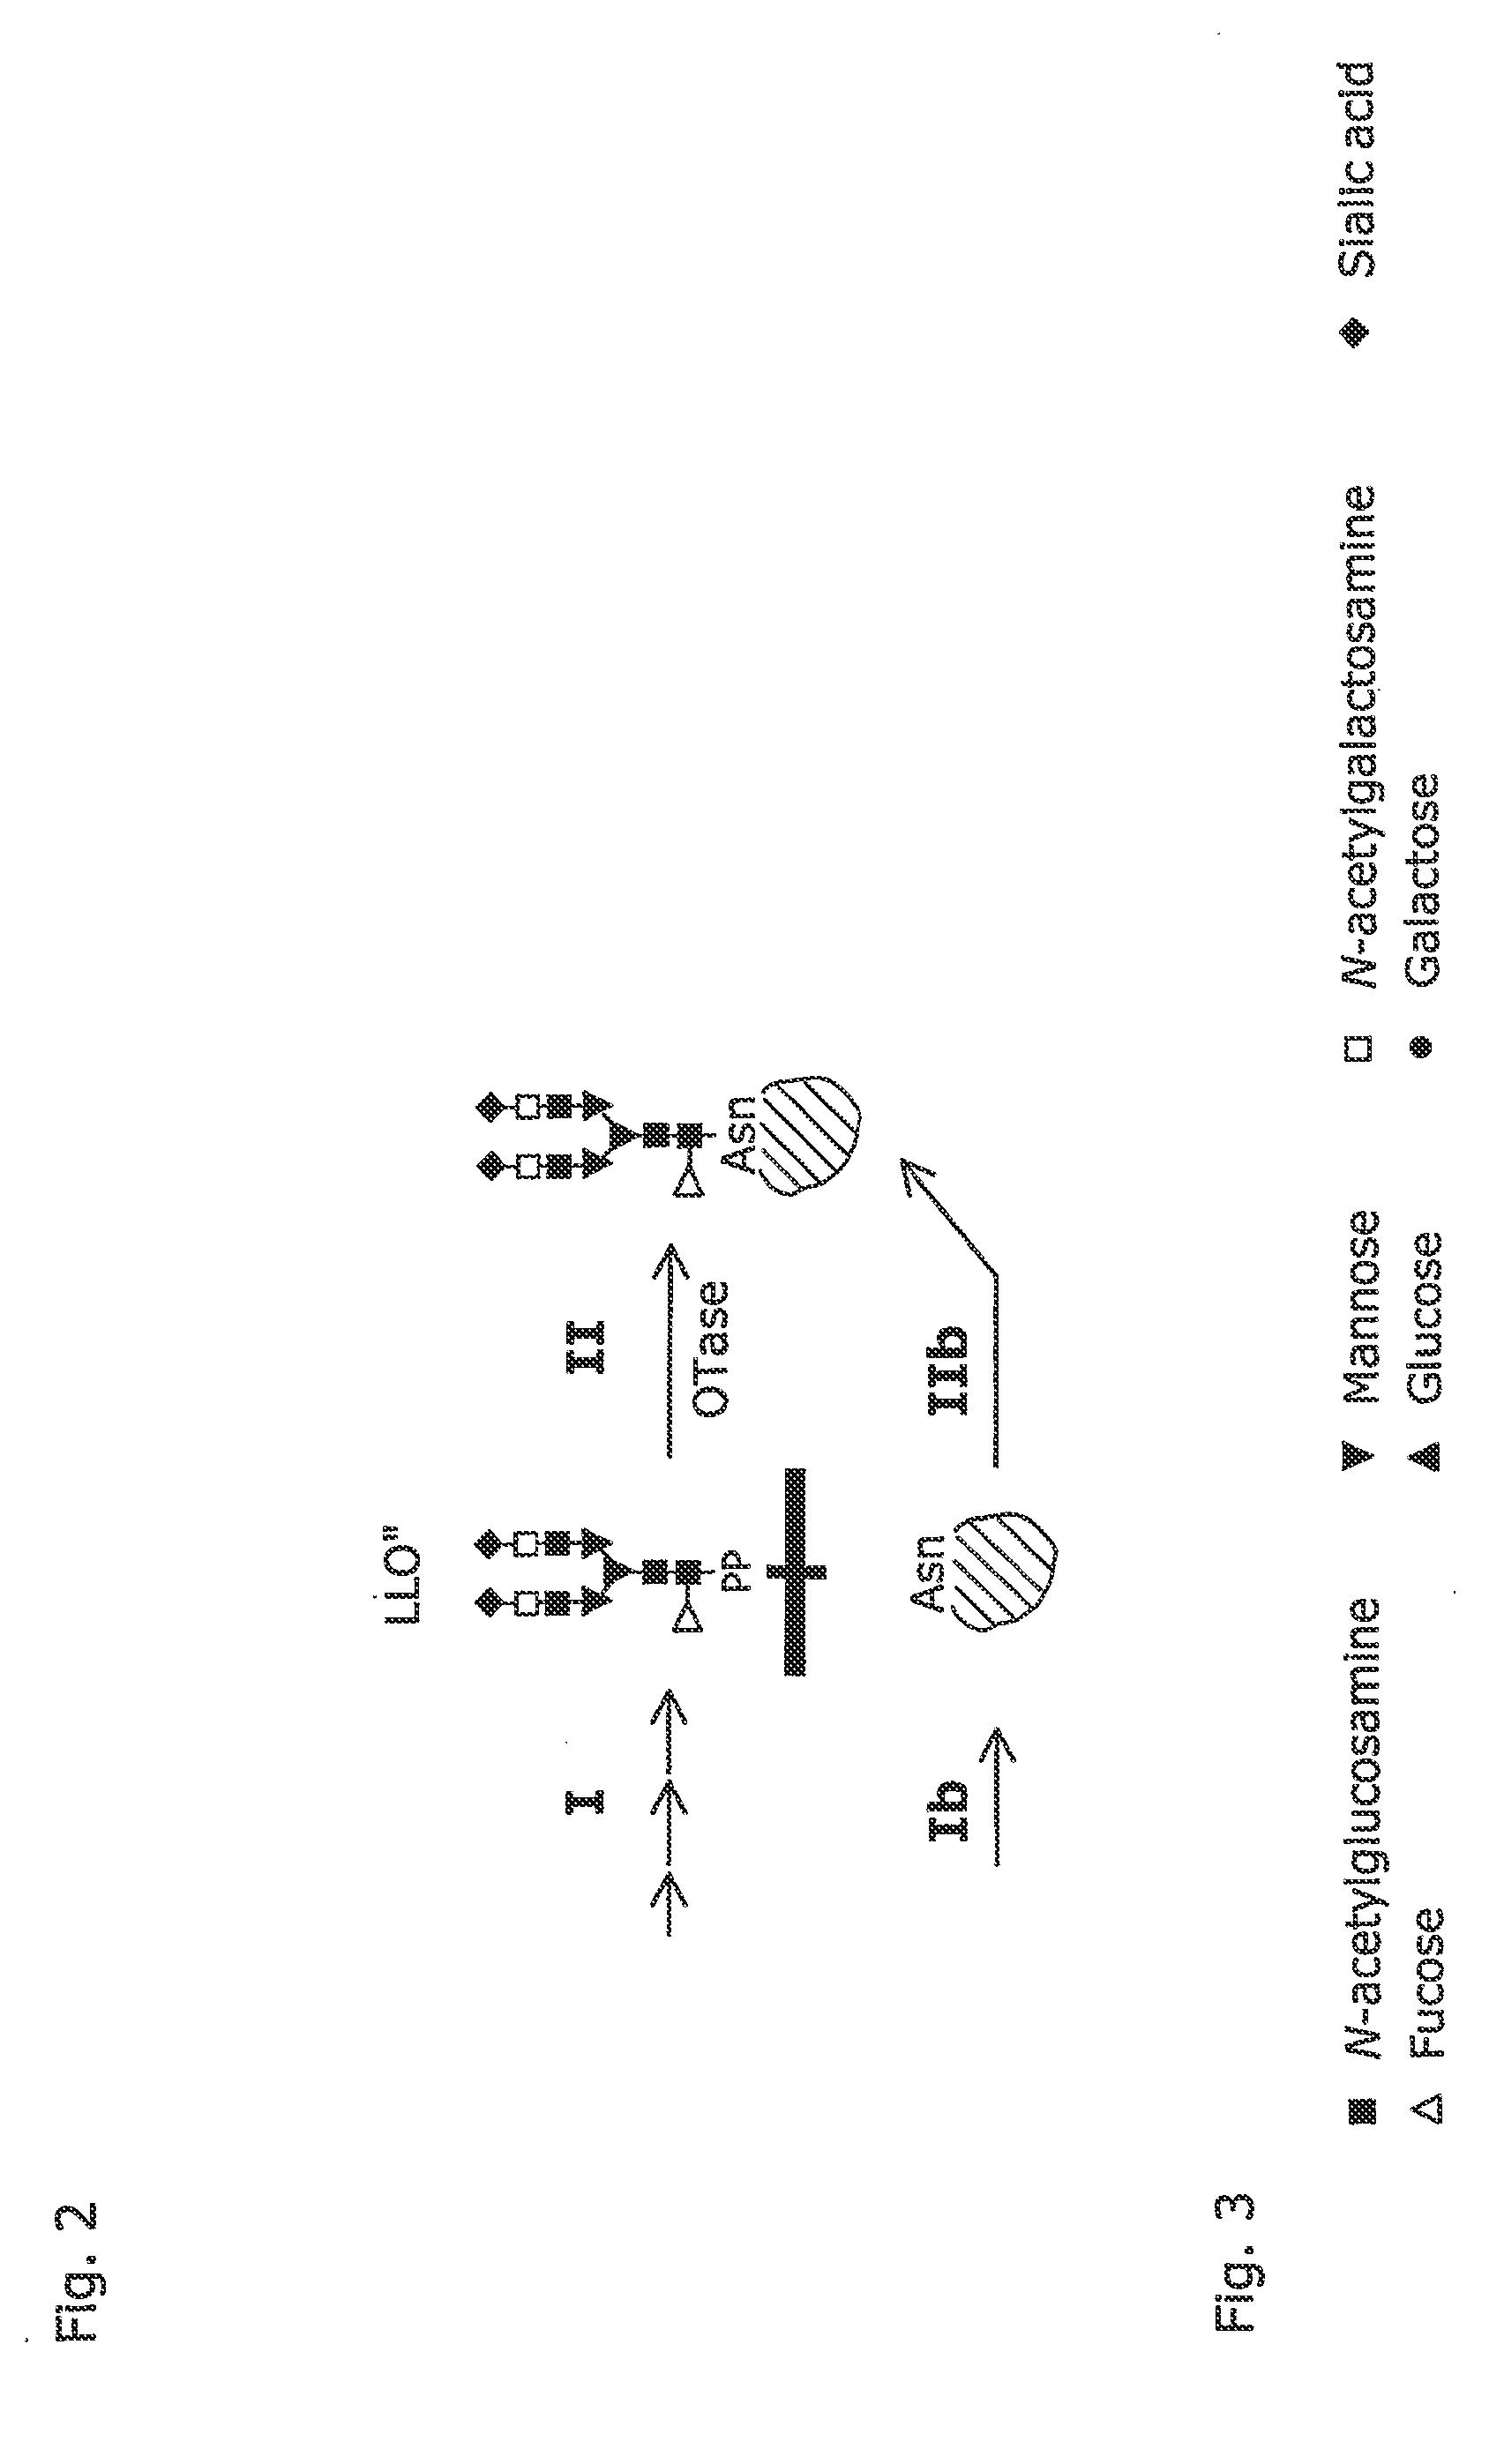 System and method for the production of recombinant glycosylated proteins in a prokaryotic host